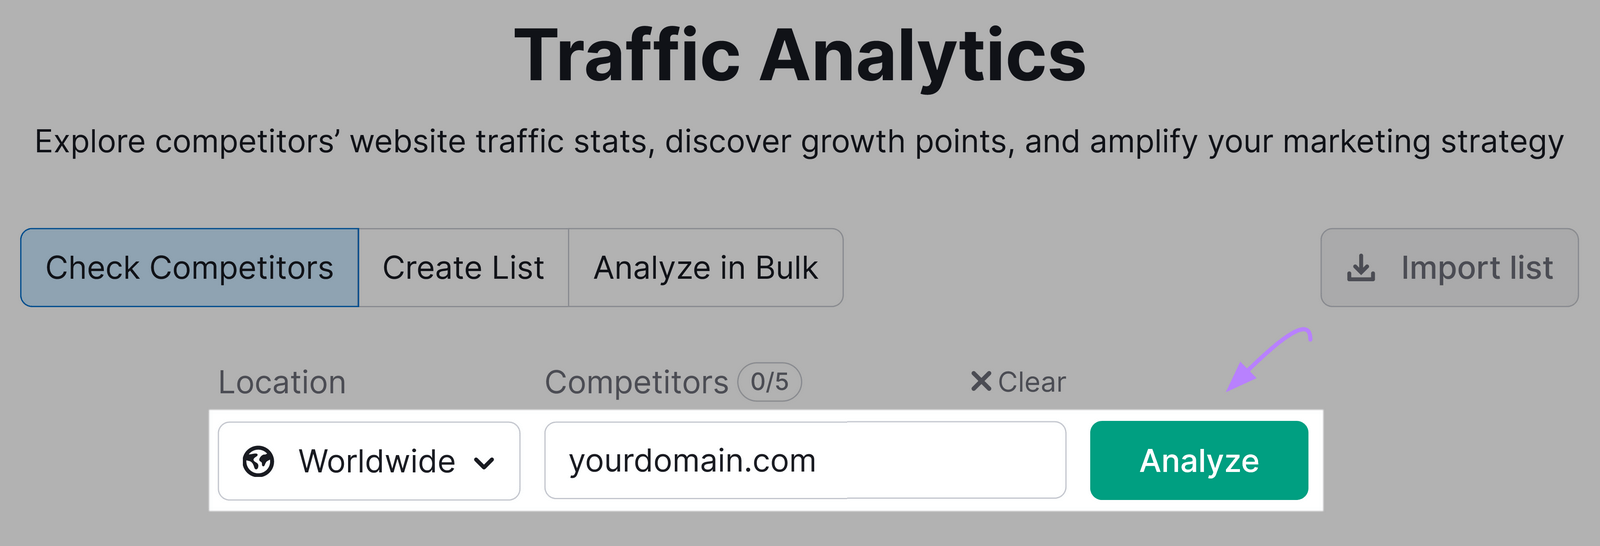 screenshot of Traffic Analytics tool with "yourdomain.com" in search bar